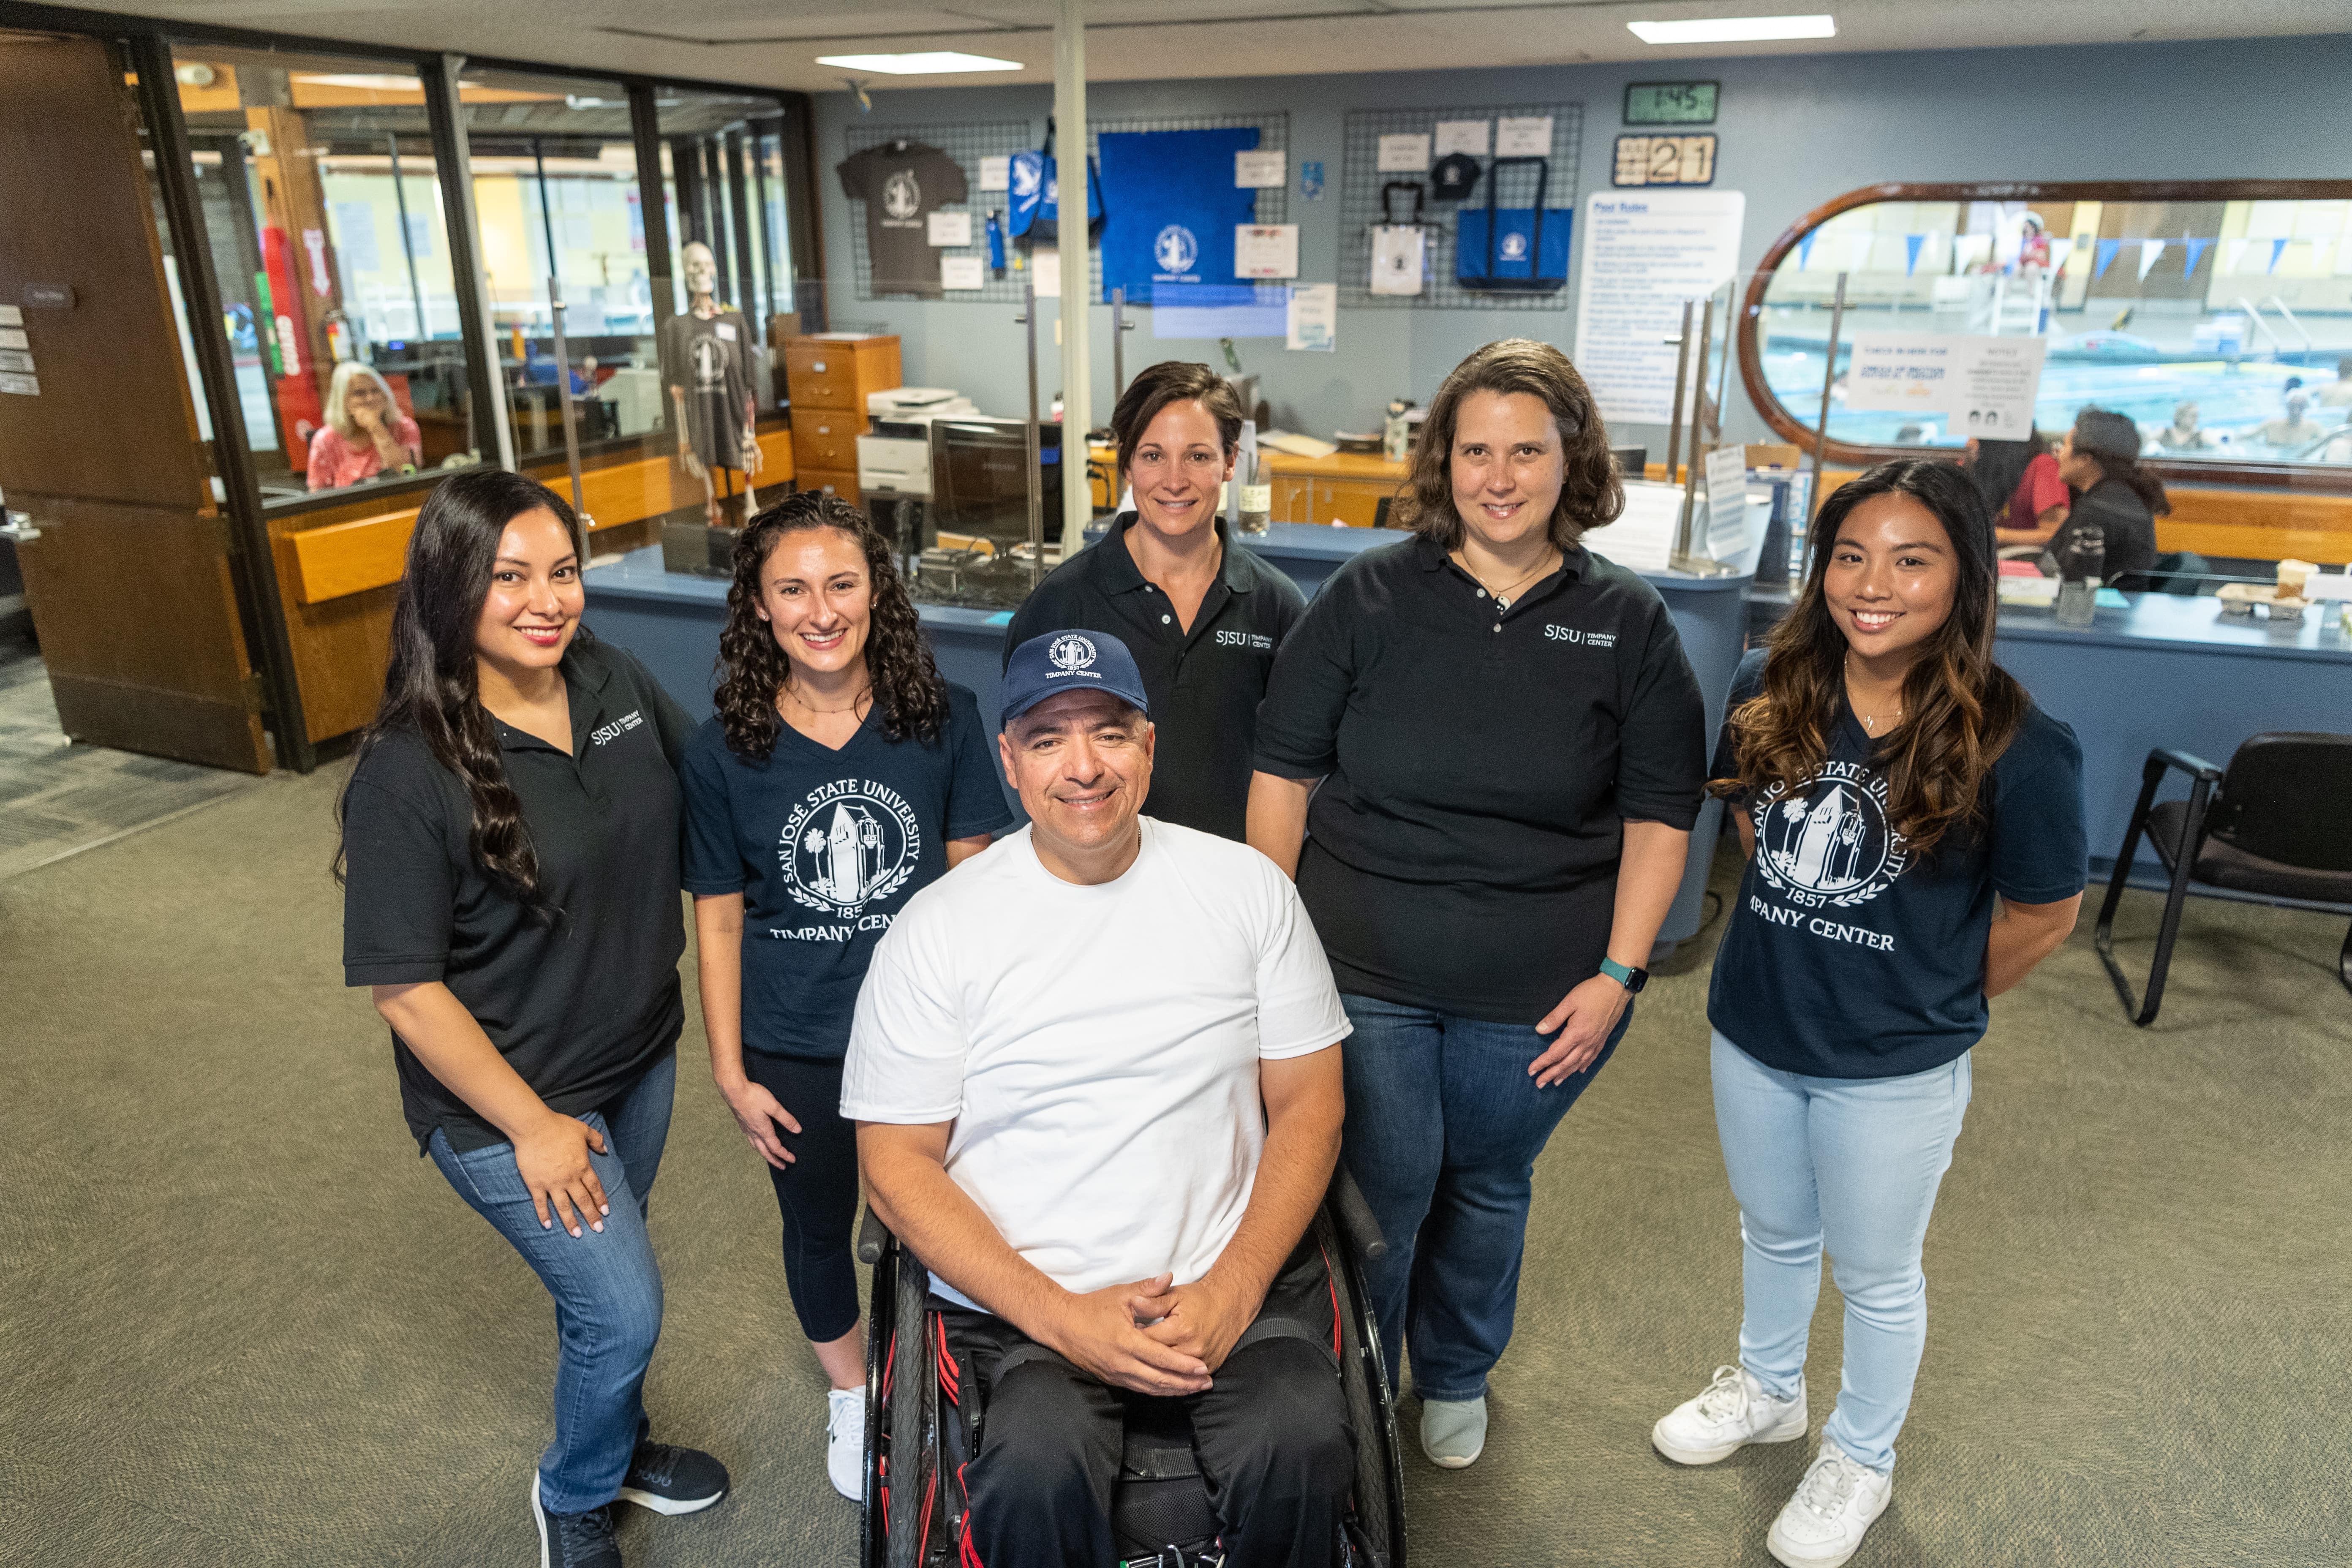 Timpany Center staff and clients have weathered many storms together. From left: staff members Carina Rodriguez-Tsai and Maranda Amaral, client Felipe Gonzalez, staffer Brittany Manrubia, program and operations director Jennifer Schachner, and staffer Kelsey Basilio. Photo: Robert C. Bain.